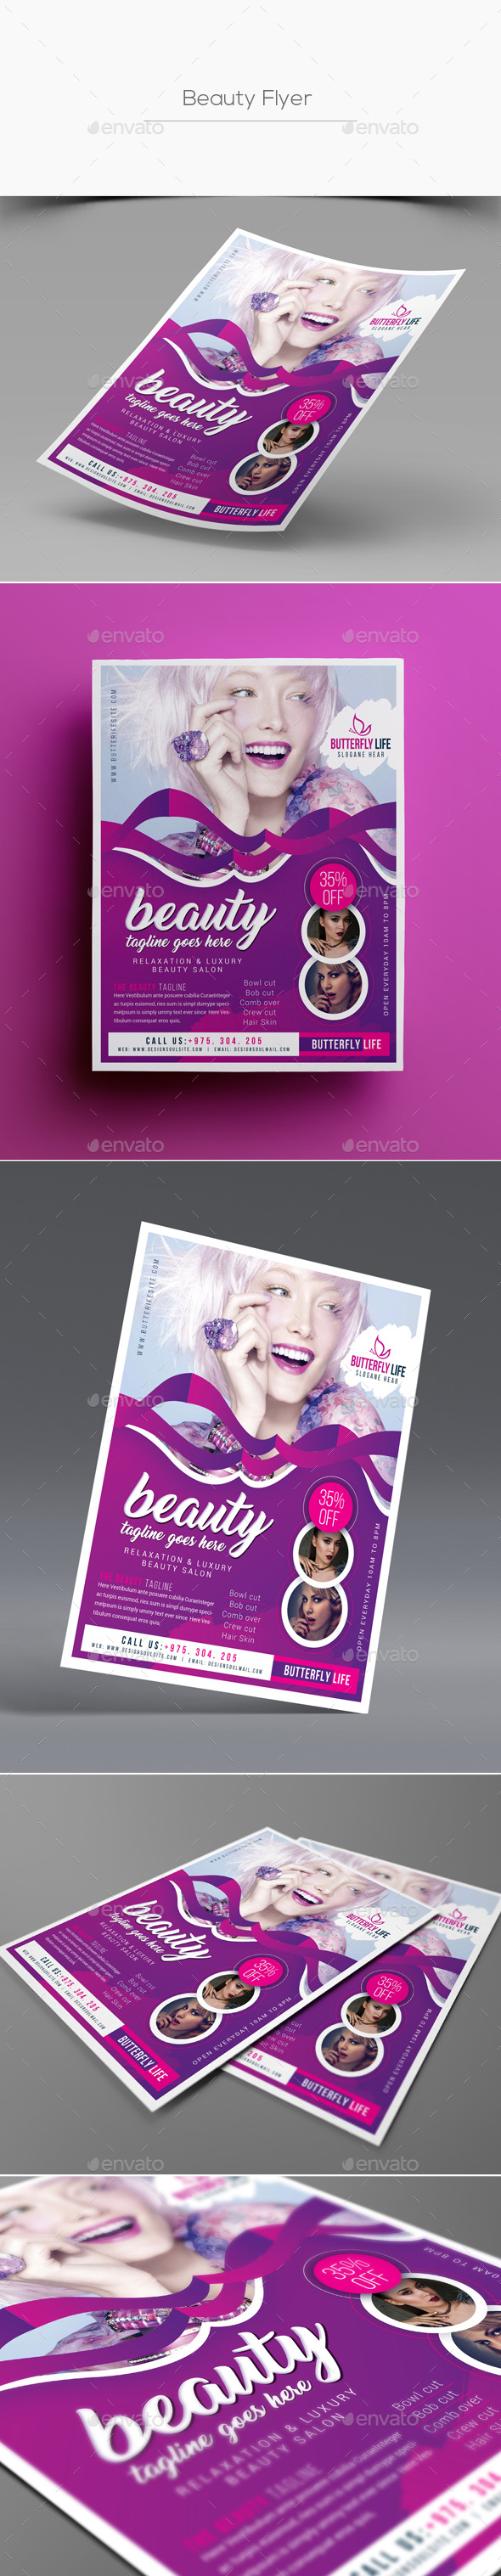 GraphicRiver Beauty Flyer 20434195